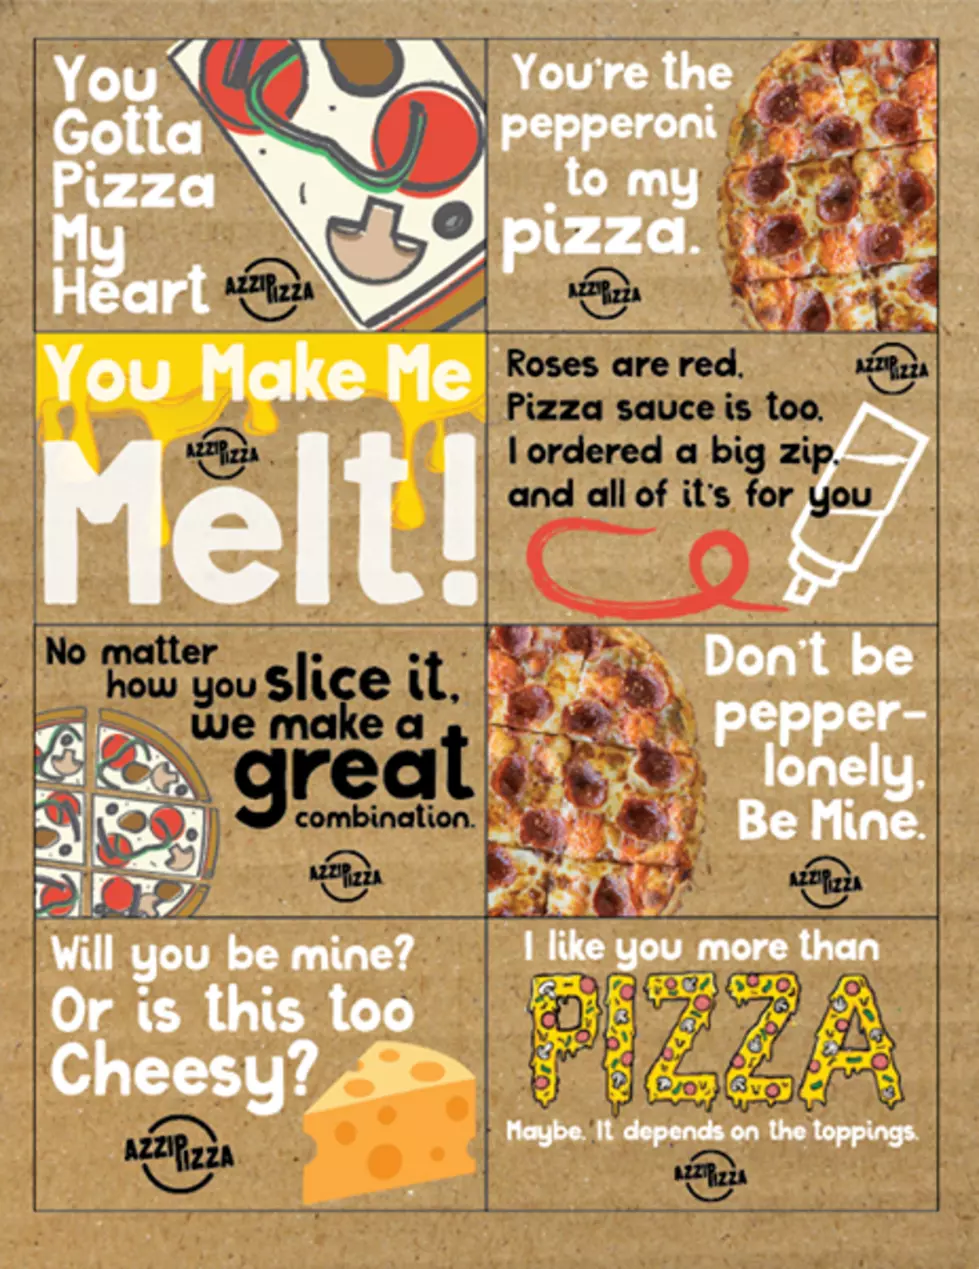 Save Money This Valentine&#8217;s Day with Azzip Pizza!